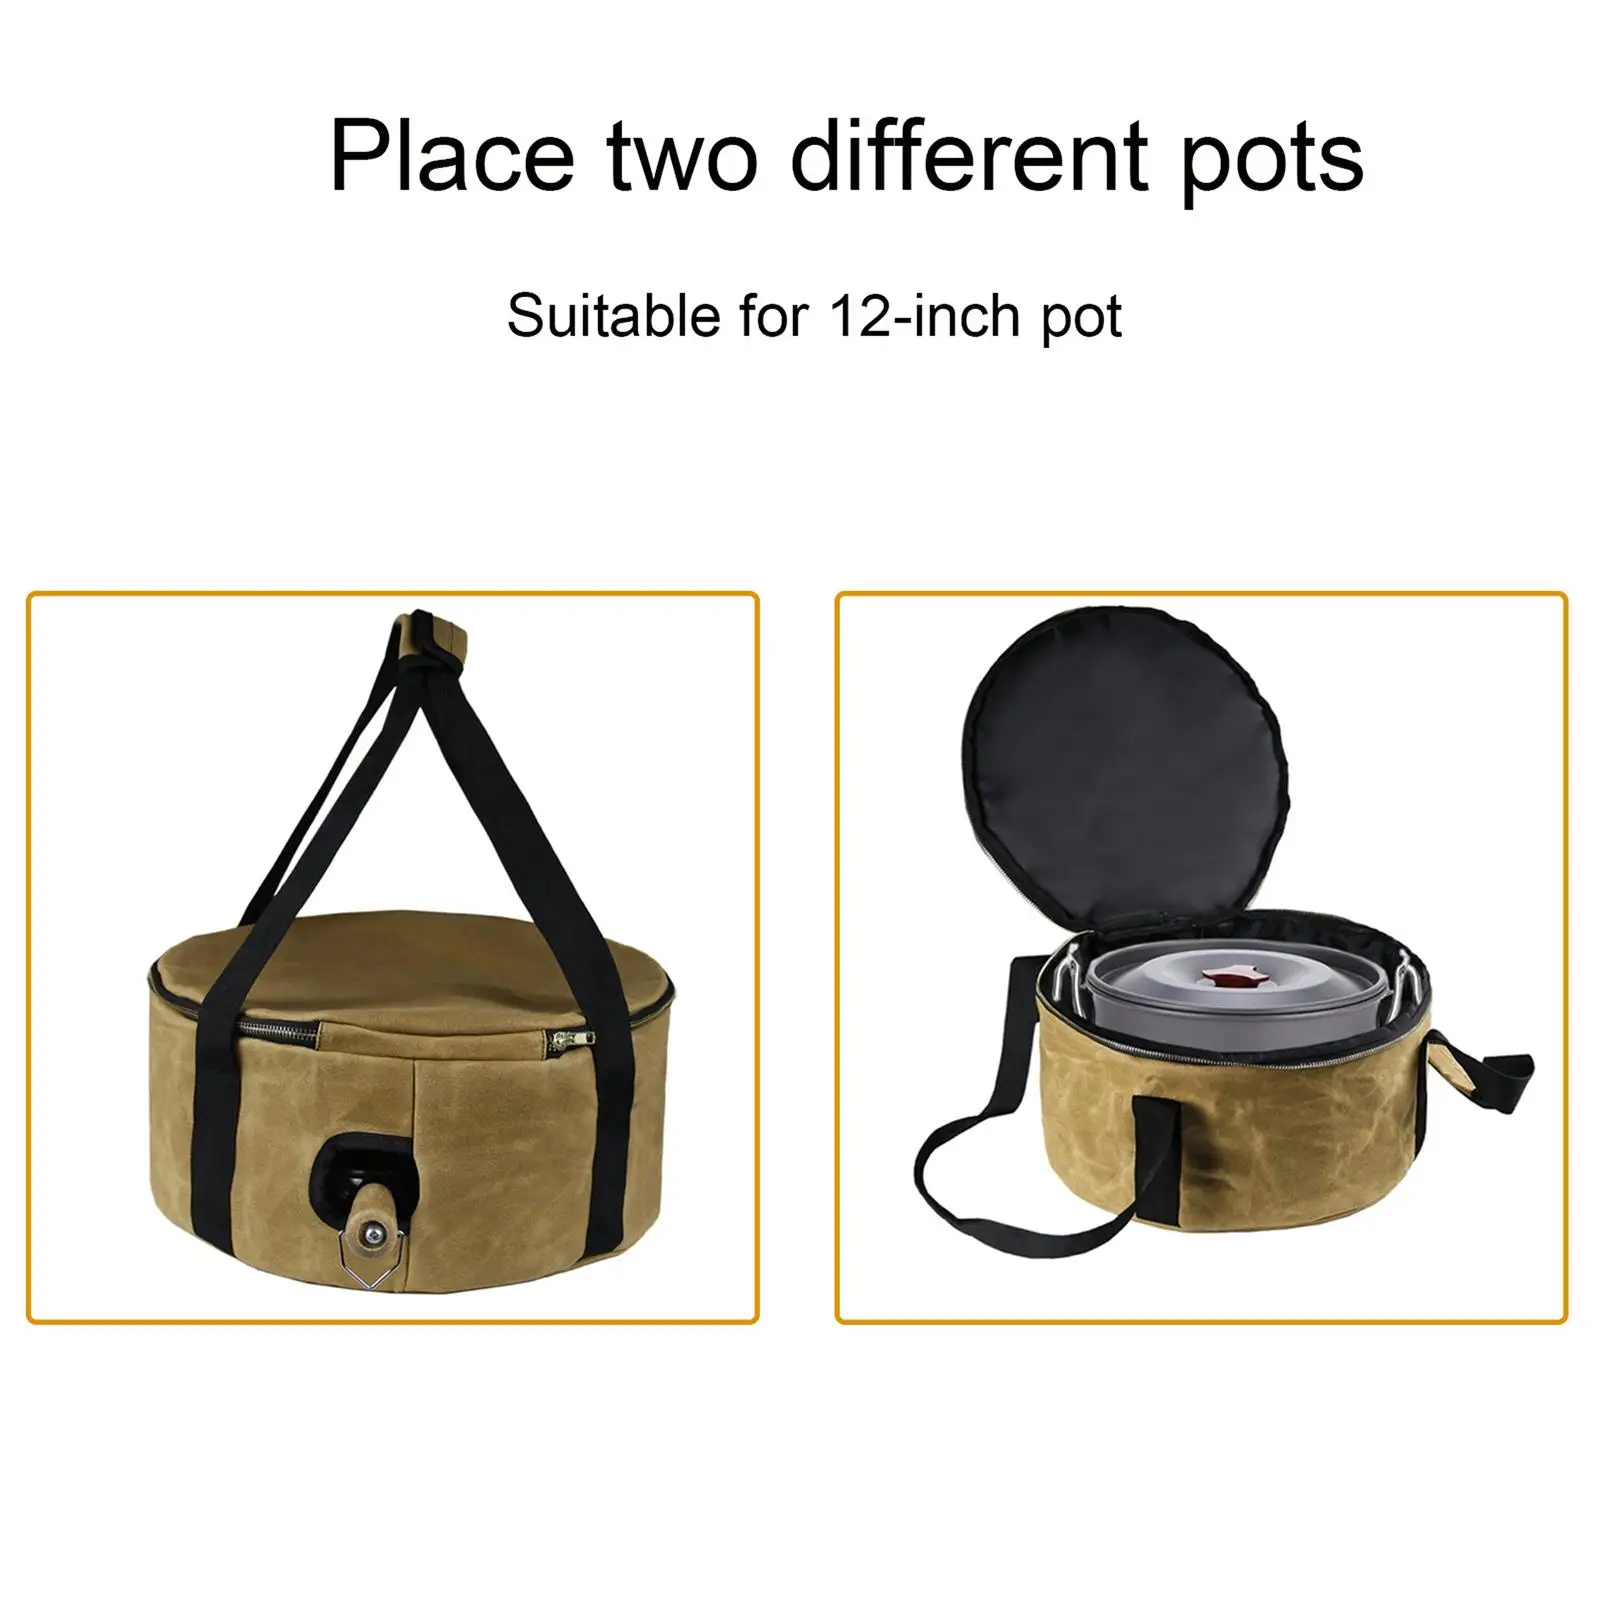 Outdoor Camping Storage Bag Picnic Basket Cooker Pot Tableware Canister BBQ Camping Travel Meal Carry Bag Camp Cooking Supplies